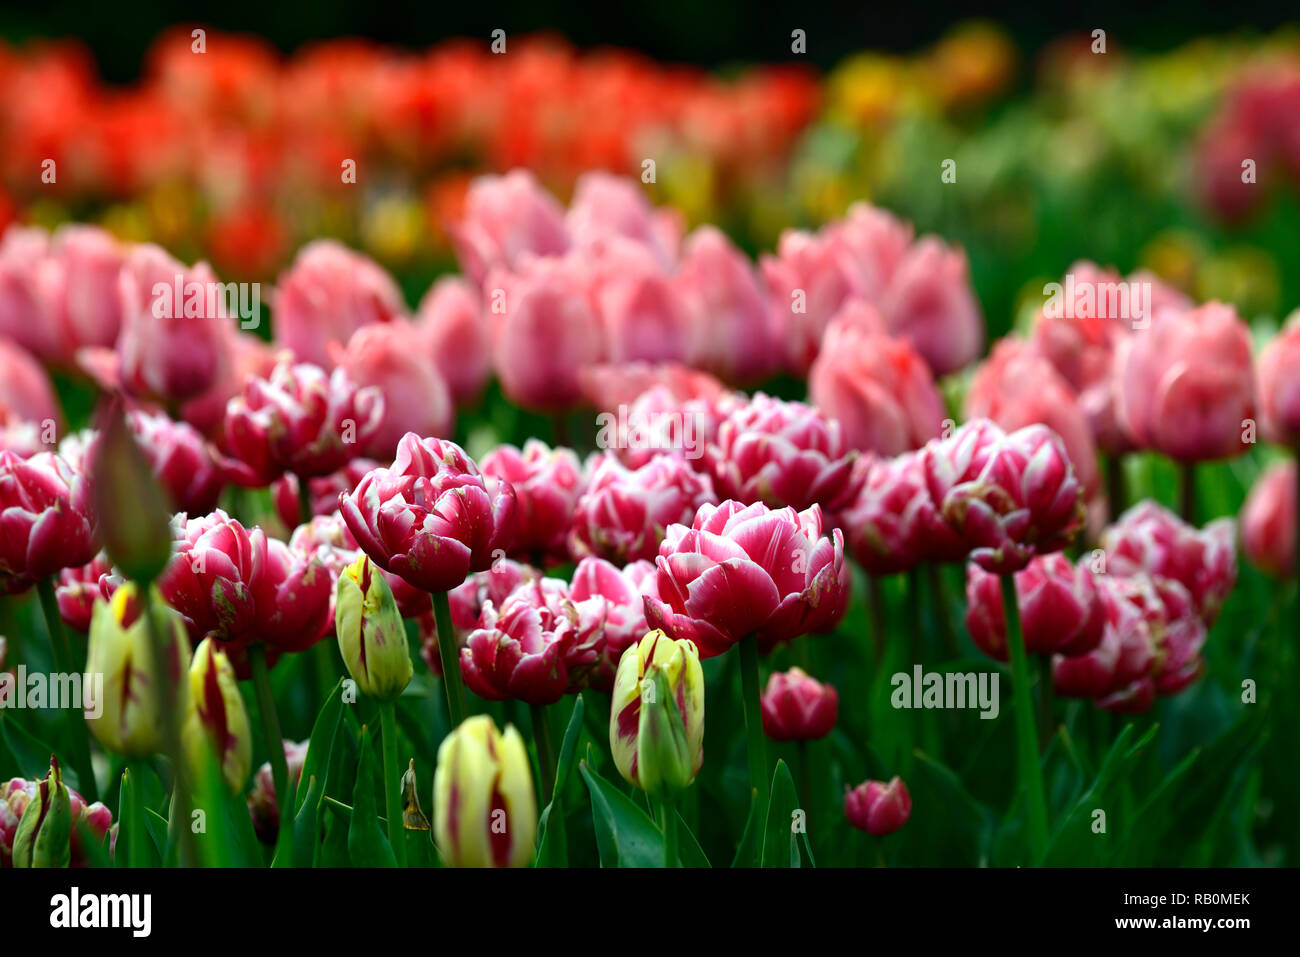 tulipa columbus,tulip columbus,tulip,tulips,double,white,pink,flowers,garden,RM Floral Stock Photo